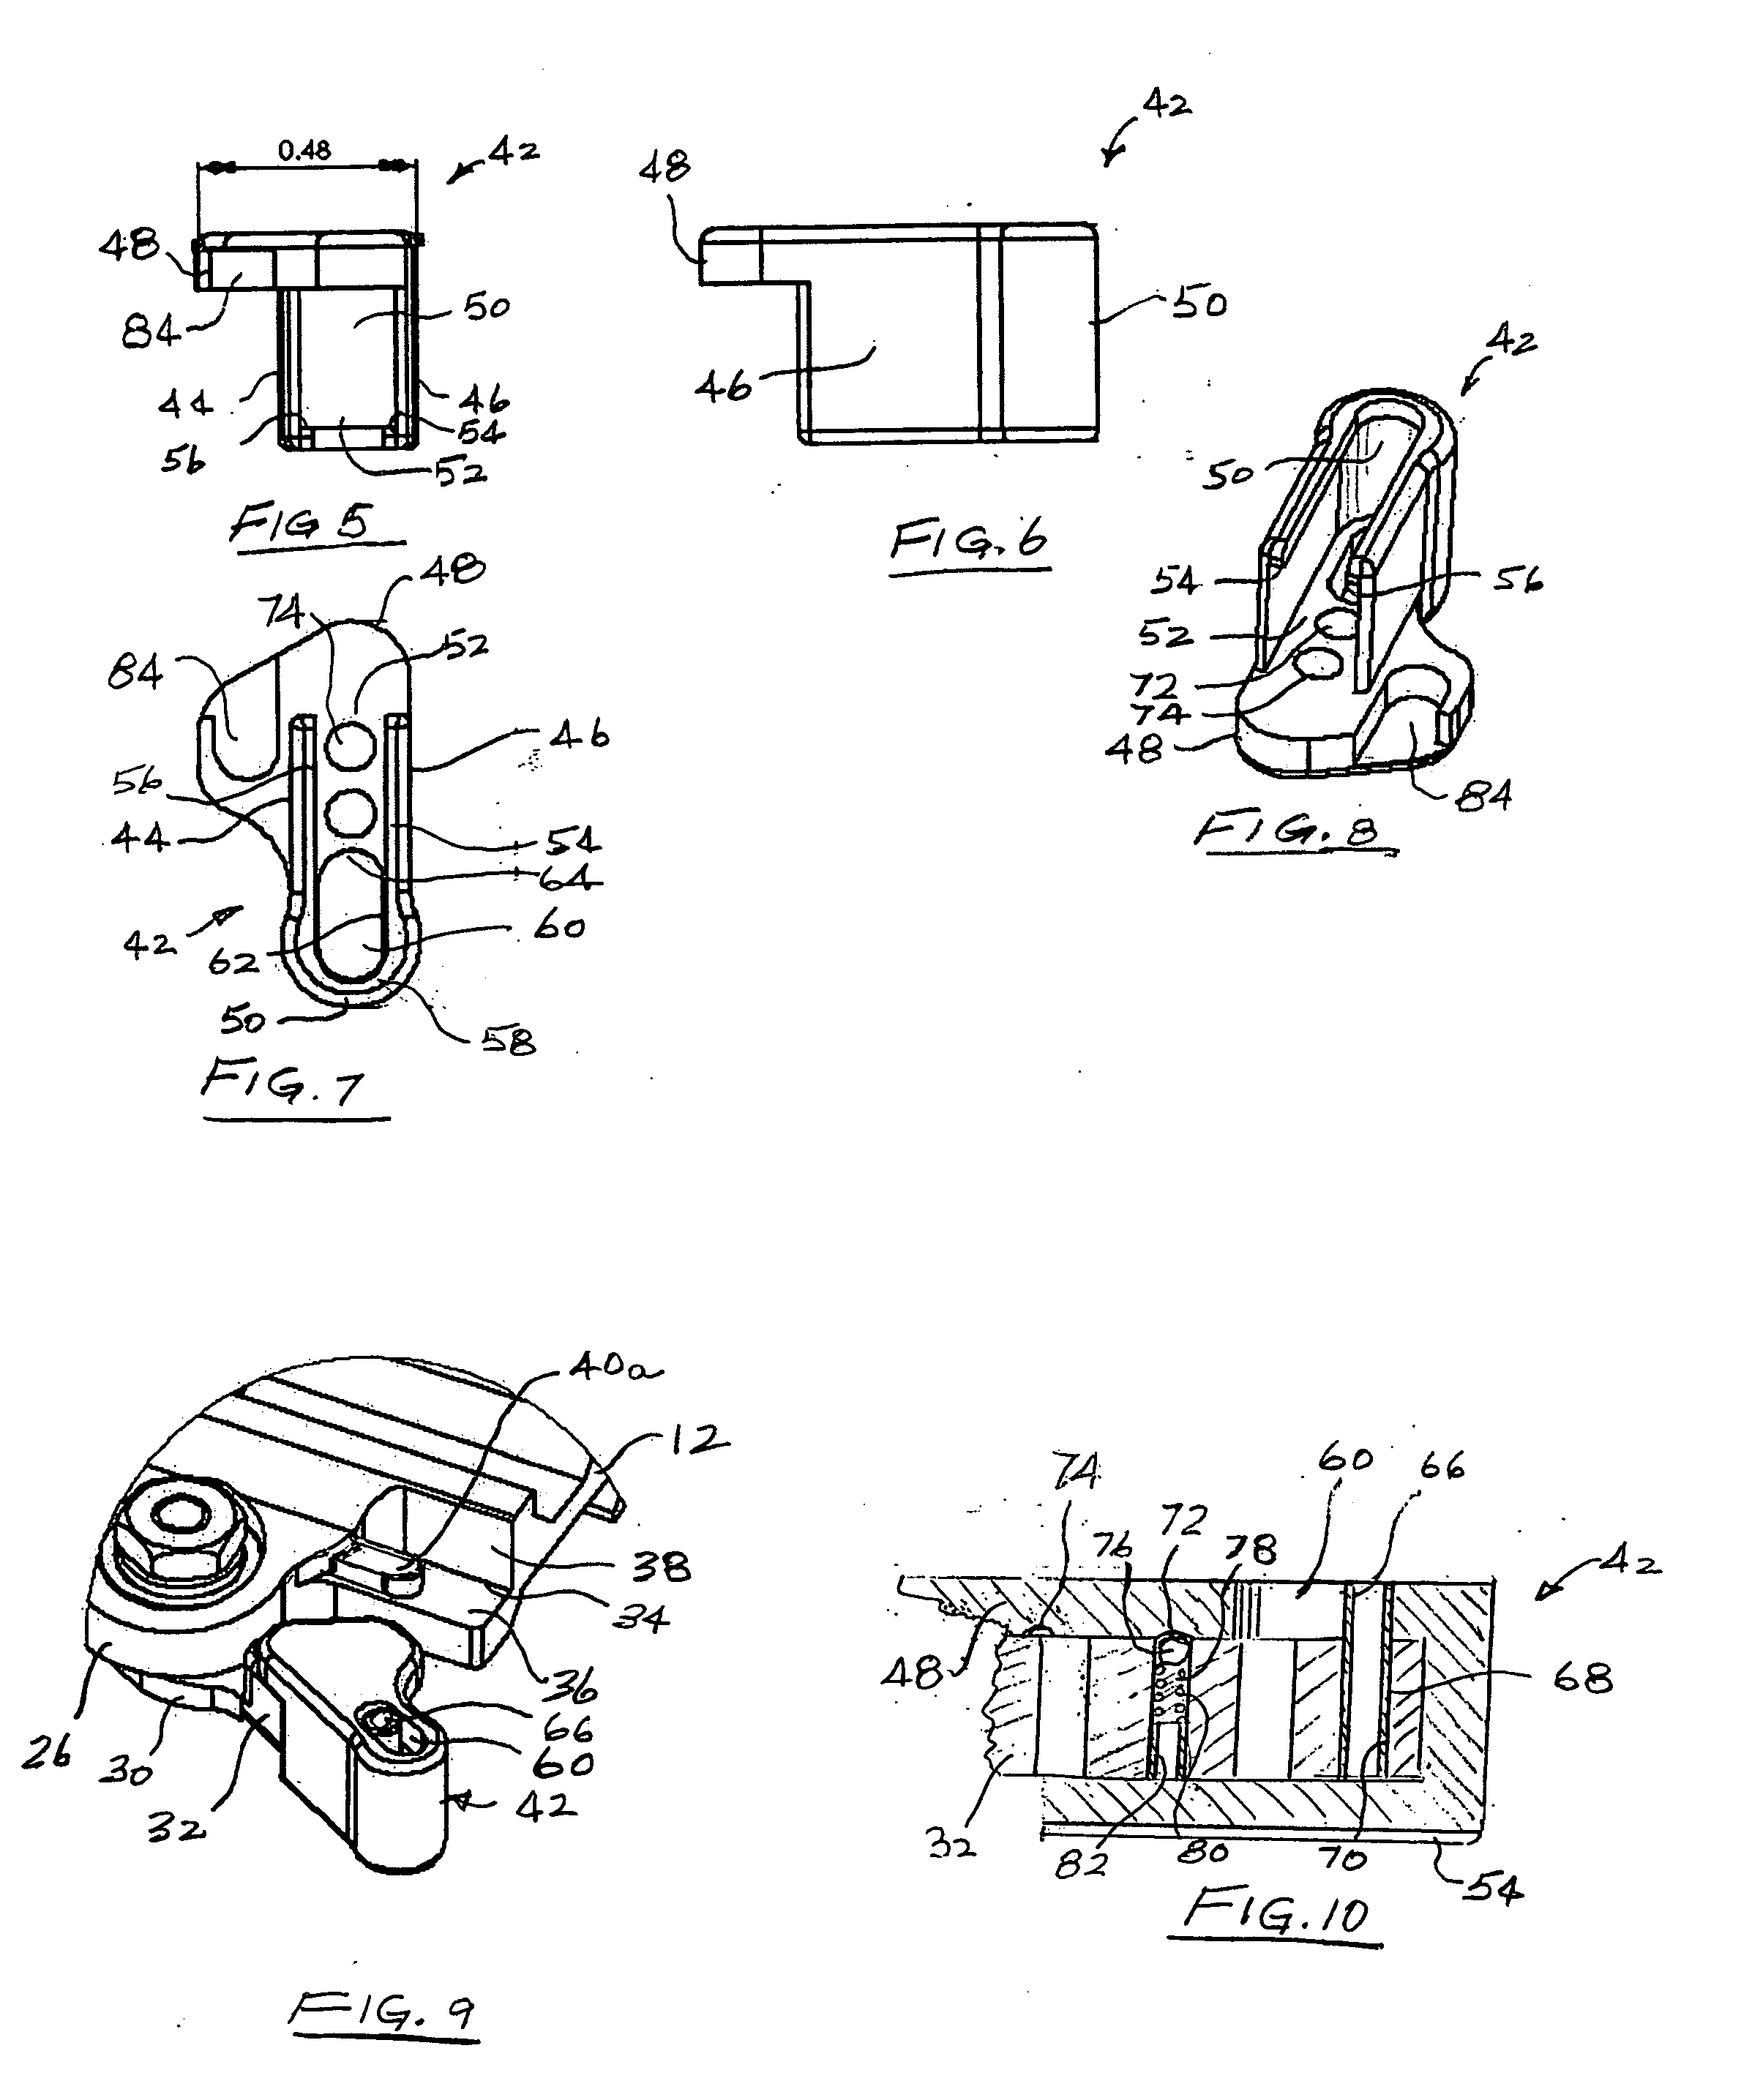 Mount for firearm sighting device having throw-lever clamp and lever safety latch